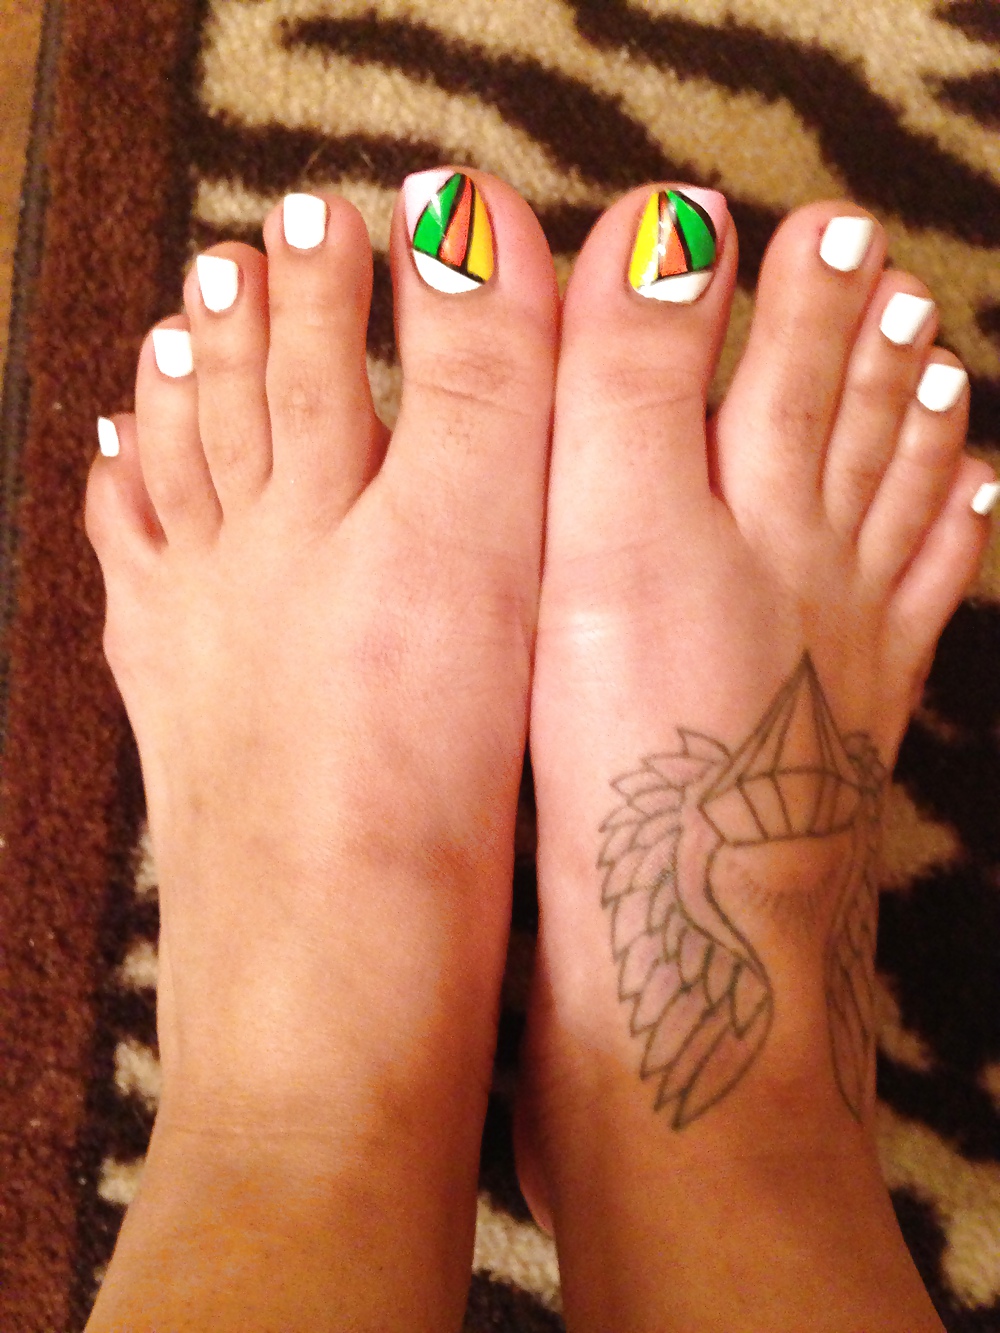 Juicy asian cambodian toes and feet
 #18512846